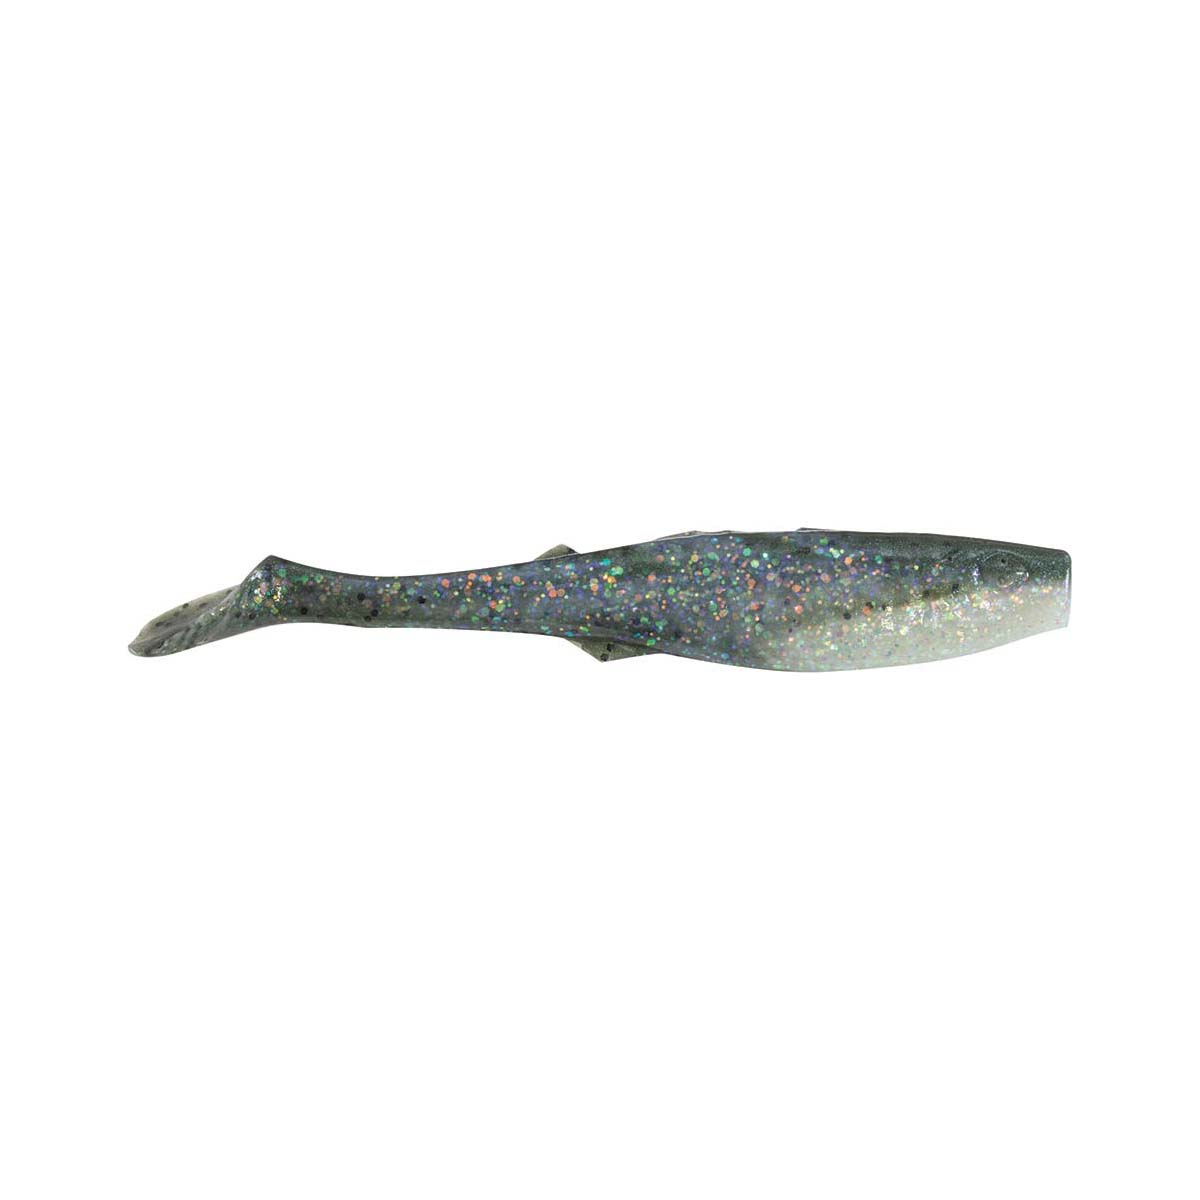 Berkley Gulp! Paddletail Shad Soft Plastic Lure 4in Silver Molting